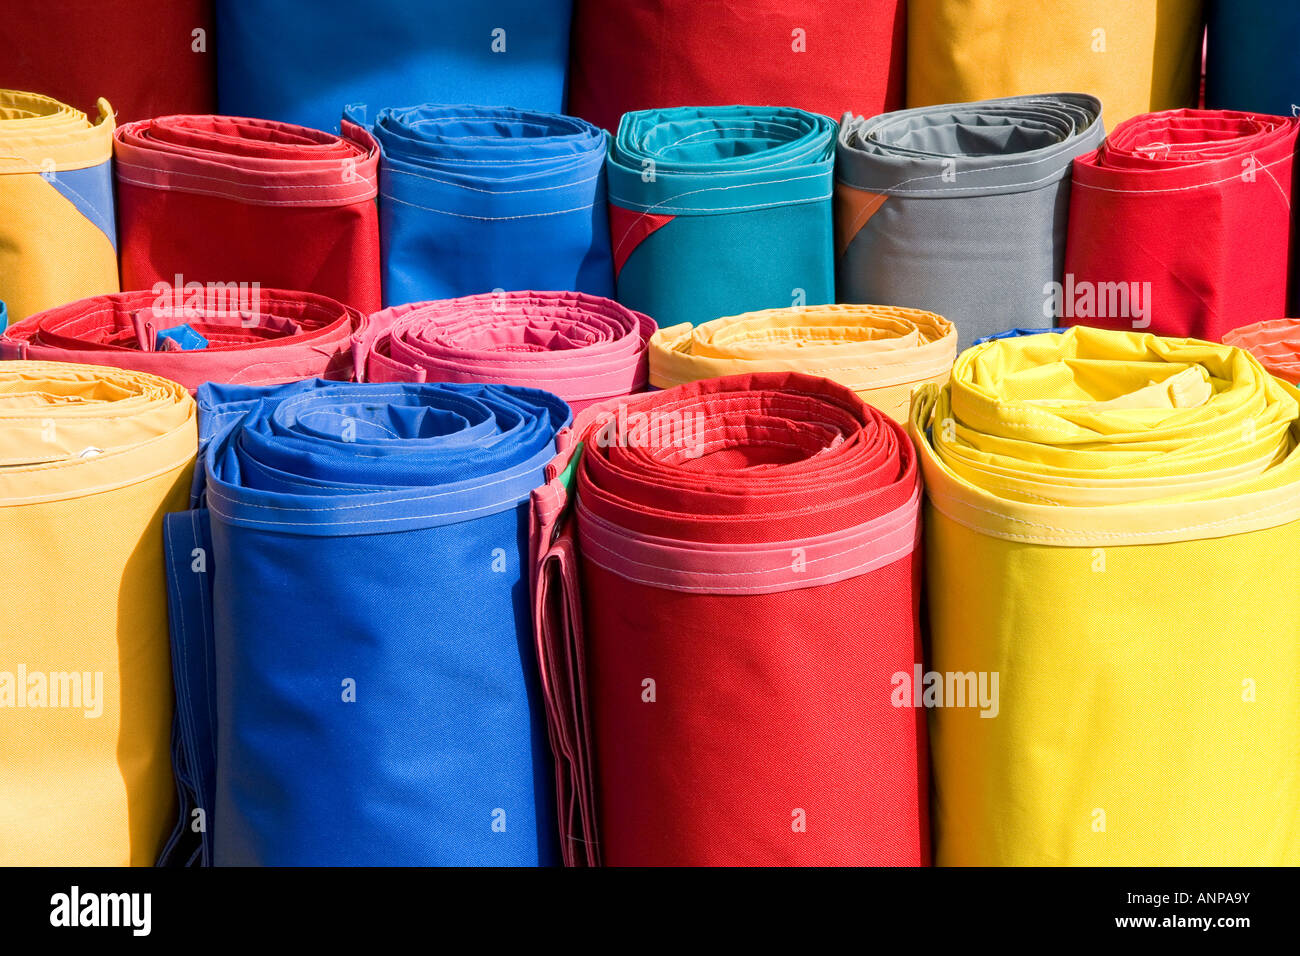 Rolls of colored canvas being sold at the Merced Market in Mexico City Mexico Stock Photo